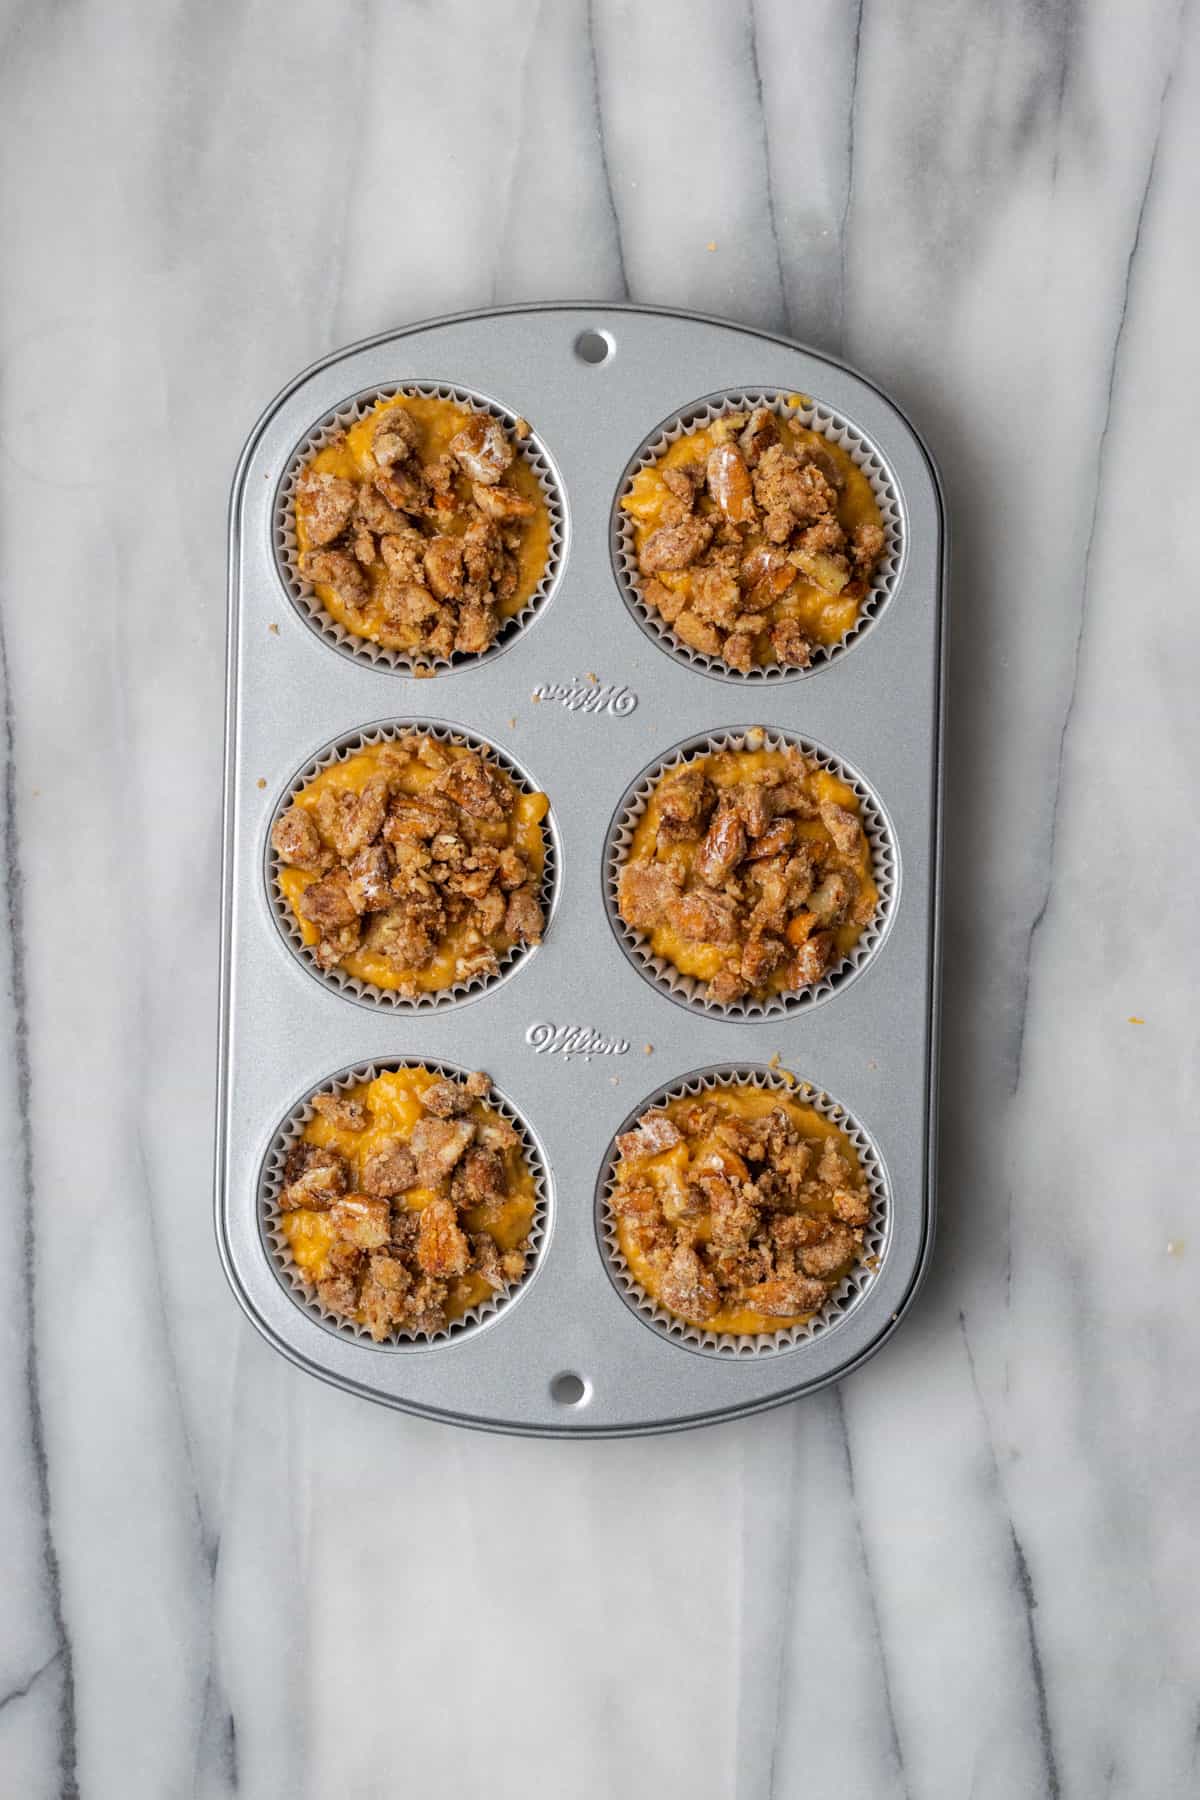 Sweet potato muffins topped with pecan streusel in the metal muffin pan.